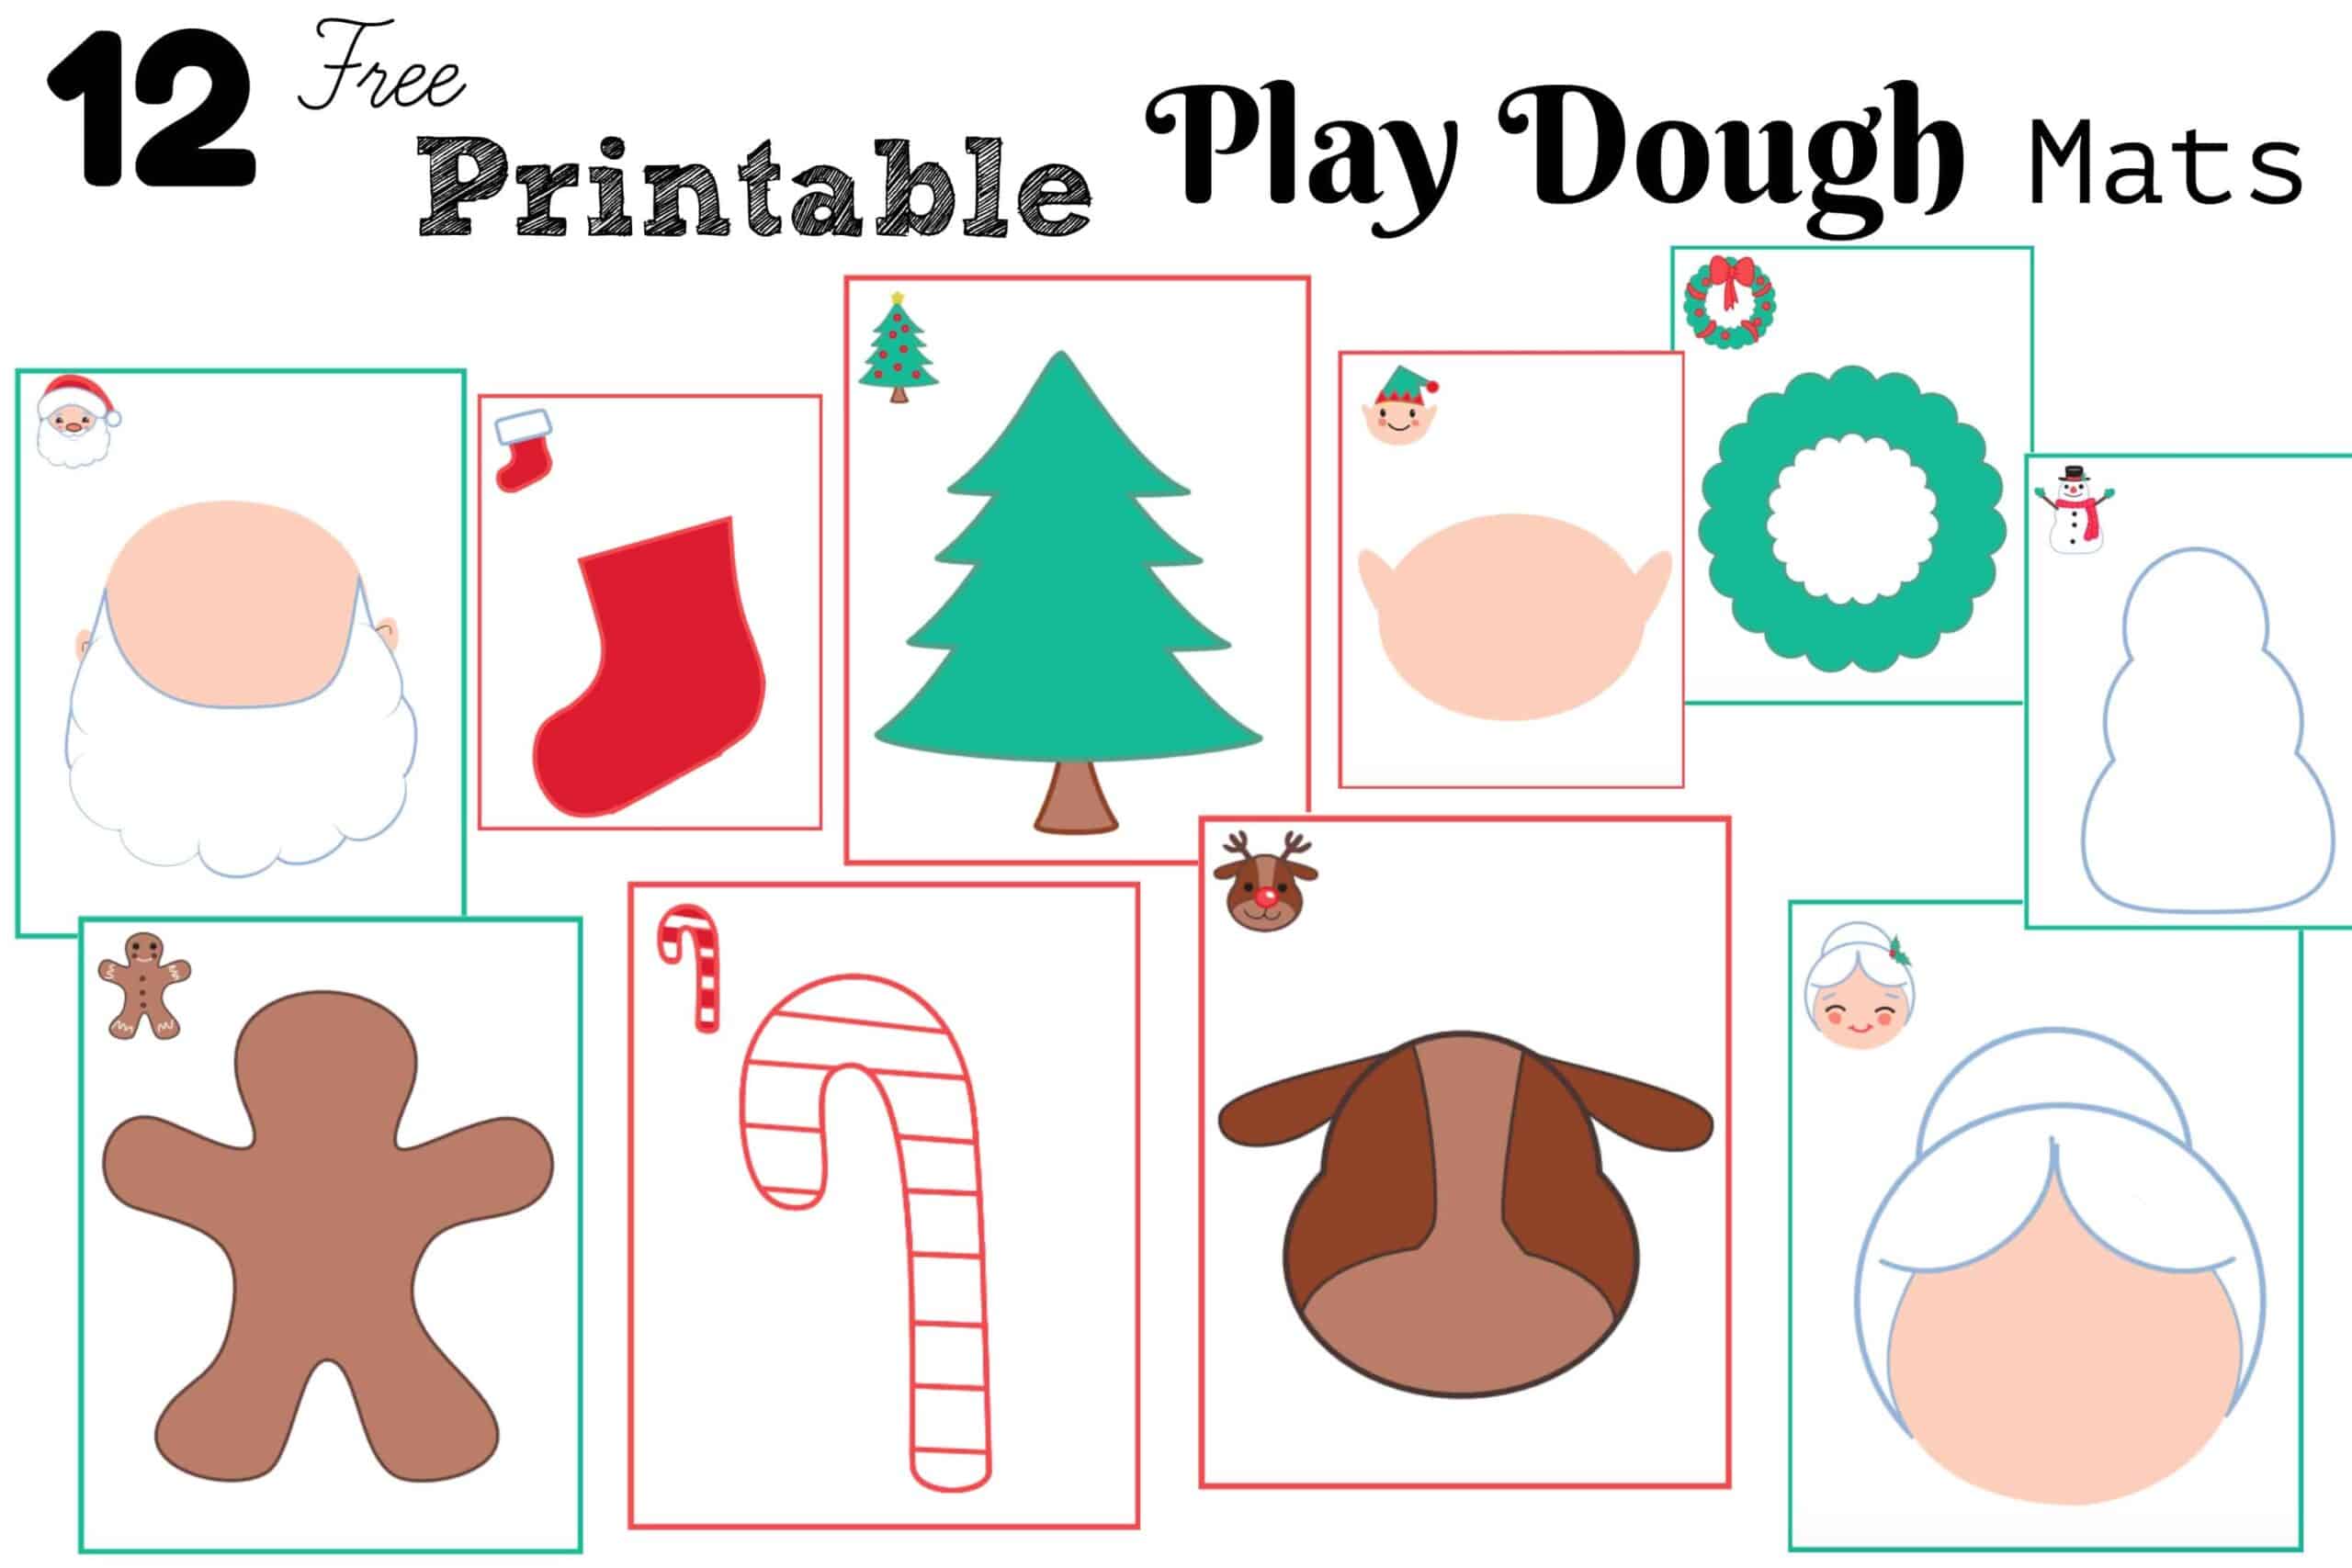 Free Printable Play Dough Mats - Your Therapy Source